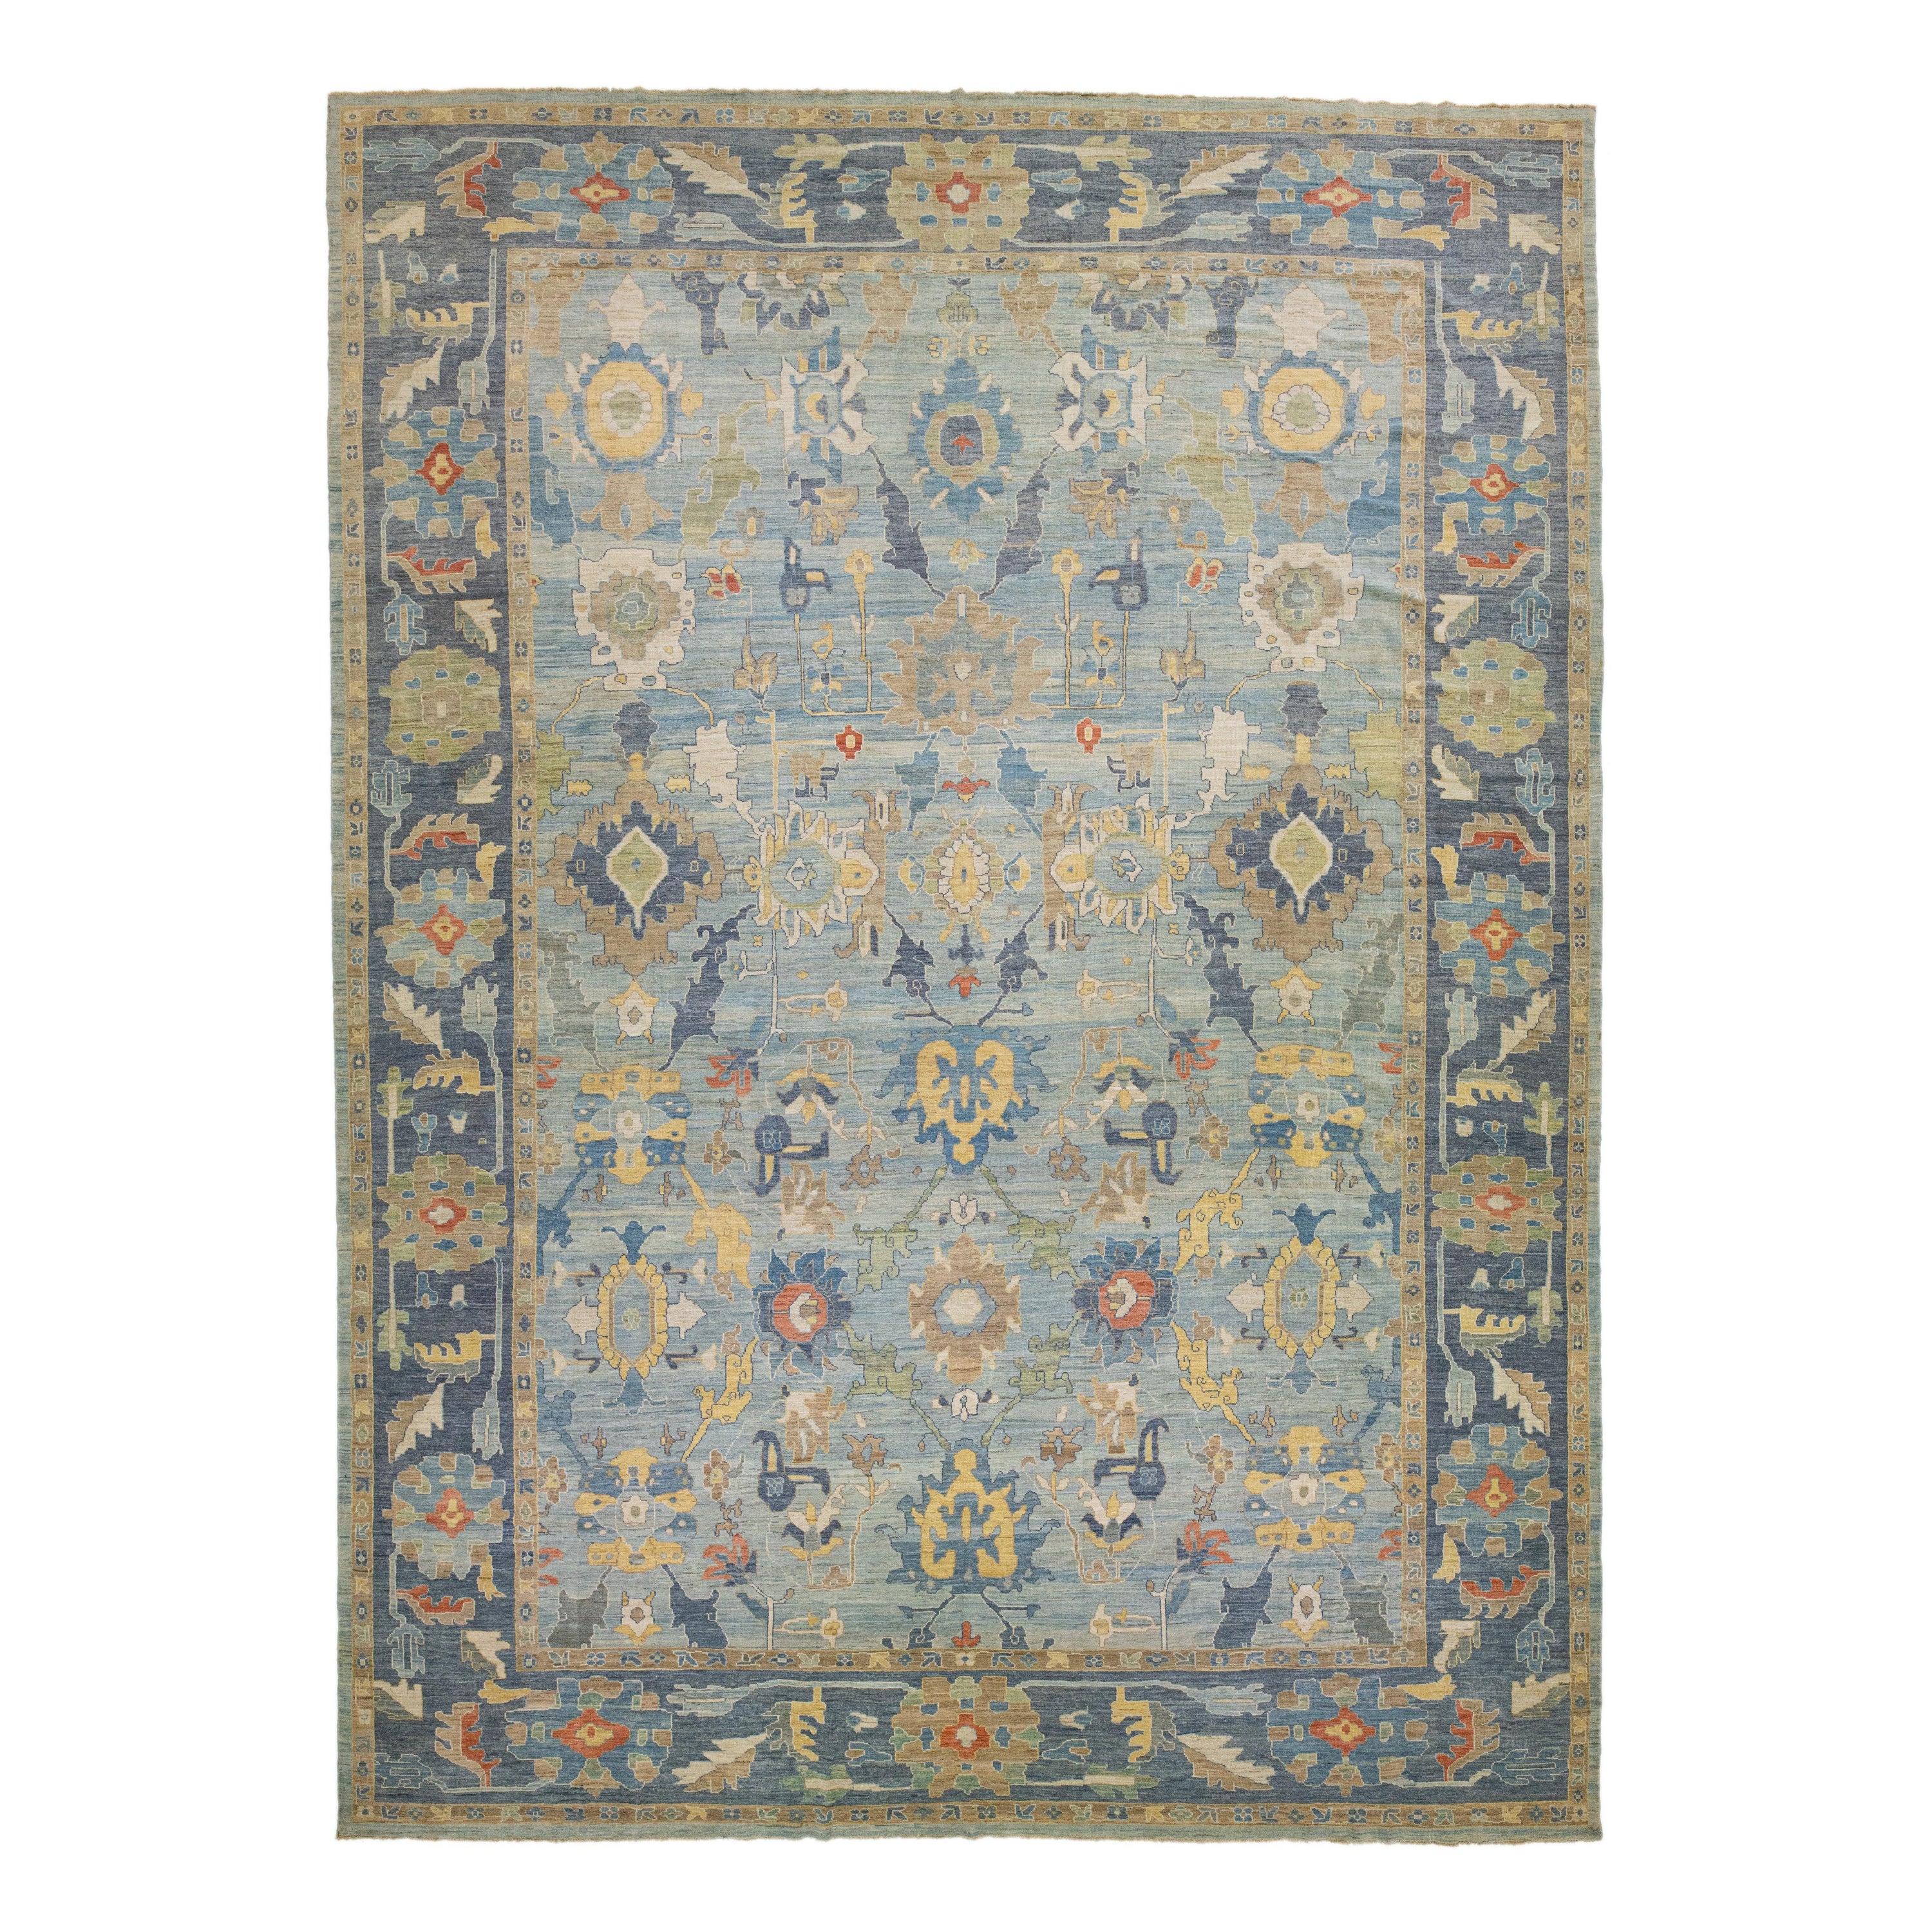 Light Blue Oversize Sultanabad Wool Rug Handmade with Allover Pattern